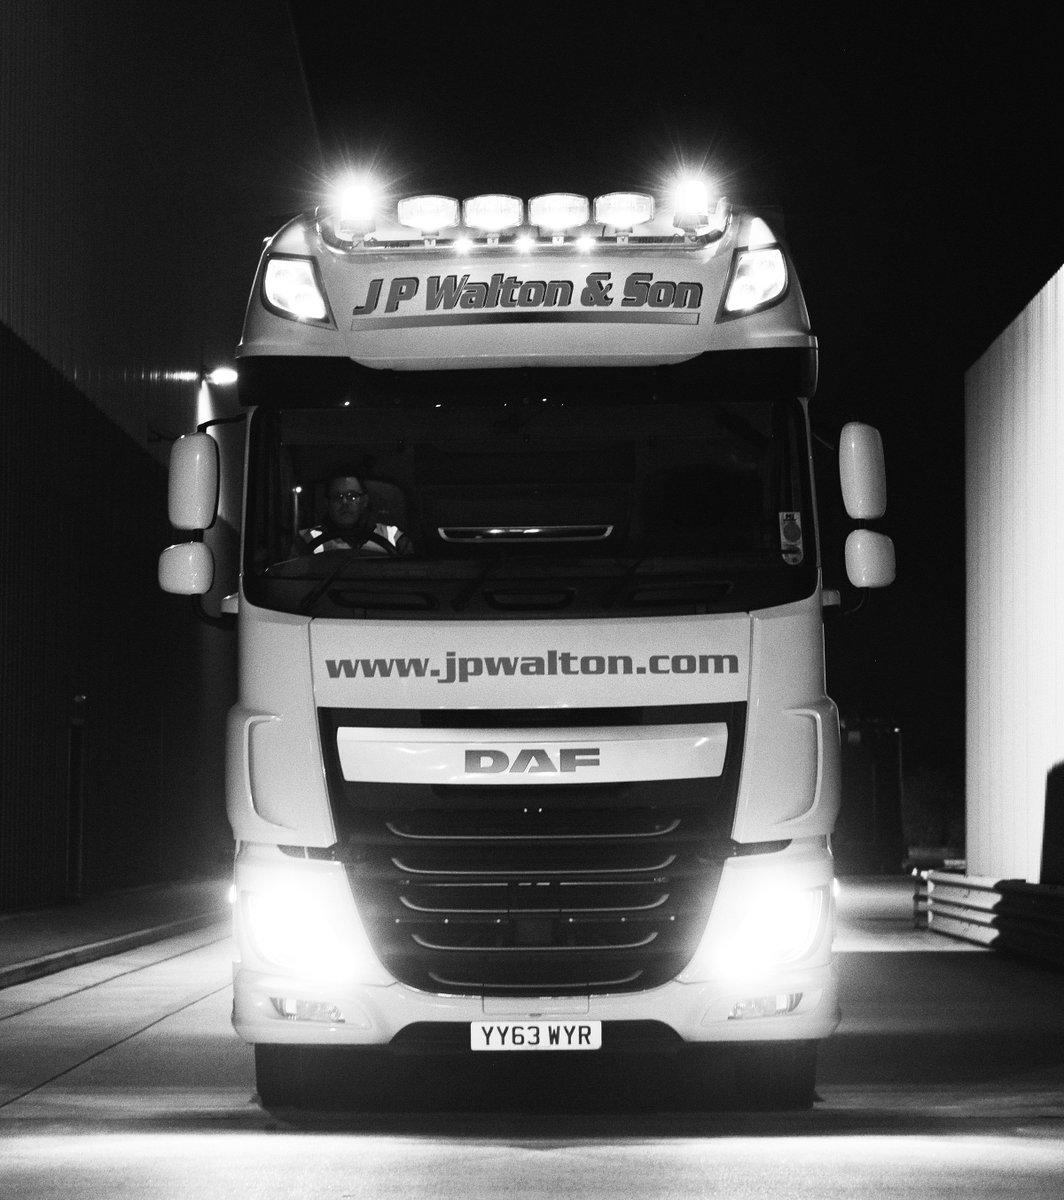 #WorkingLate tonight #doncasterisgreat ? So are we. Out there #DeliveringYourPromises #KeepingTheShelvesFull 
Making sure the #WheelsOfIndustry keep turning. #WhatCanWeMoveForYou traffic@jpwalton.com for your unique #haulage & #logistics quote